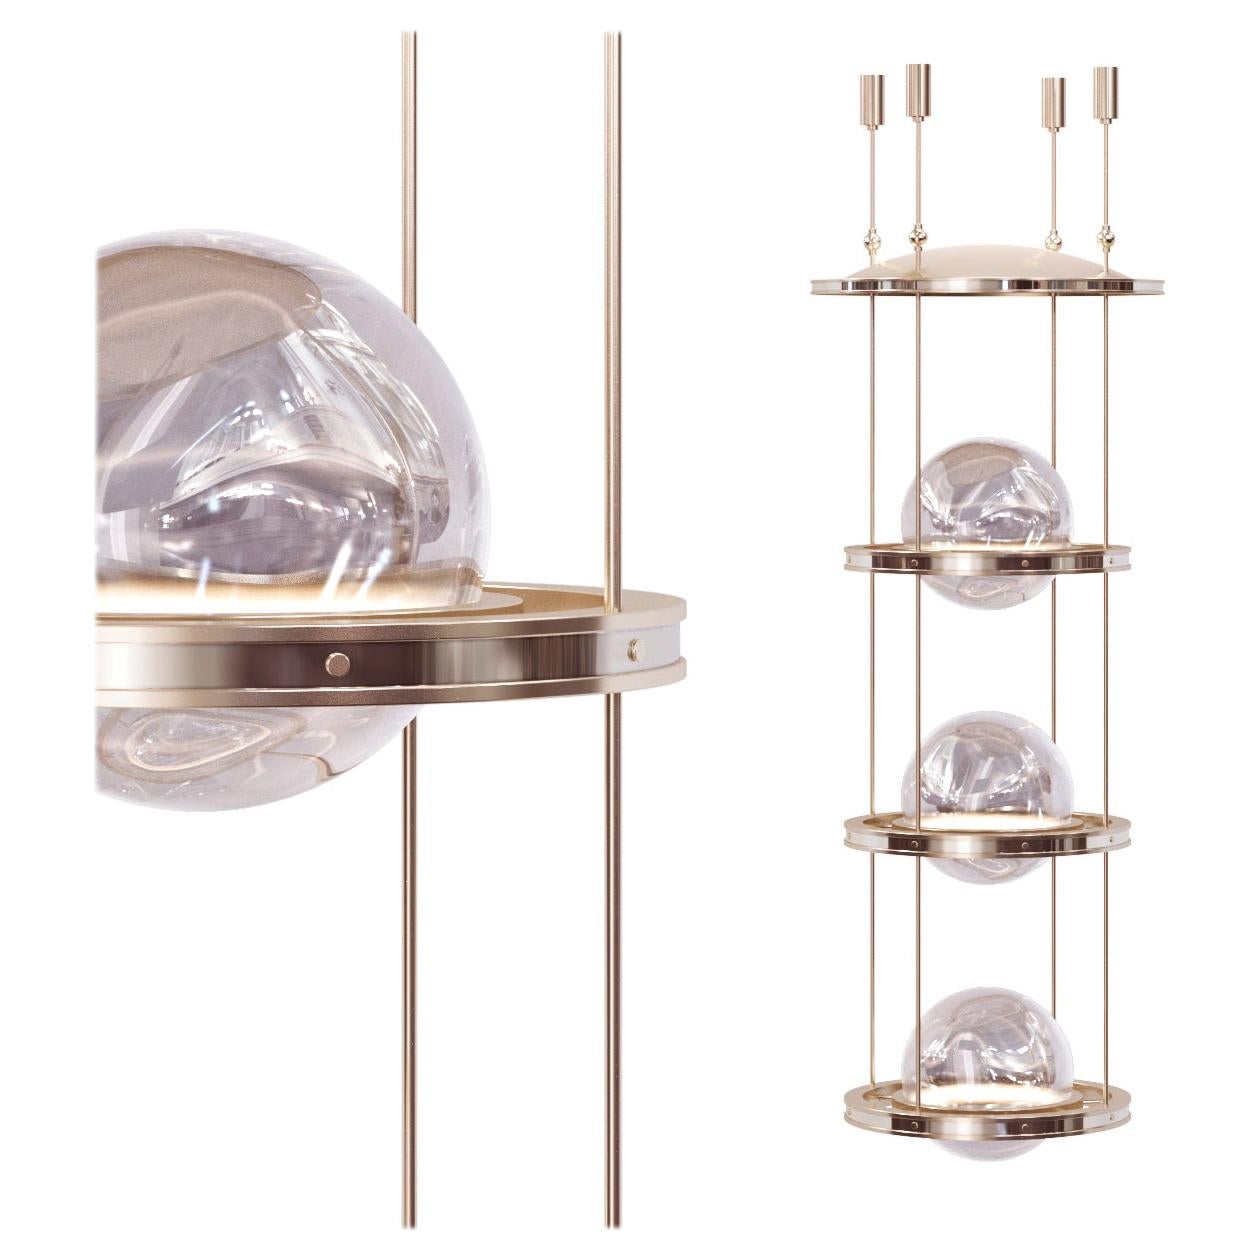 Miessa Grand Vertical Chandelier for High-Ceiling Space Ex-Display Sale For Sale